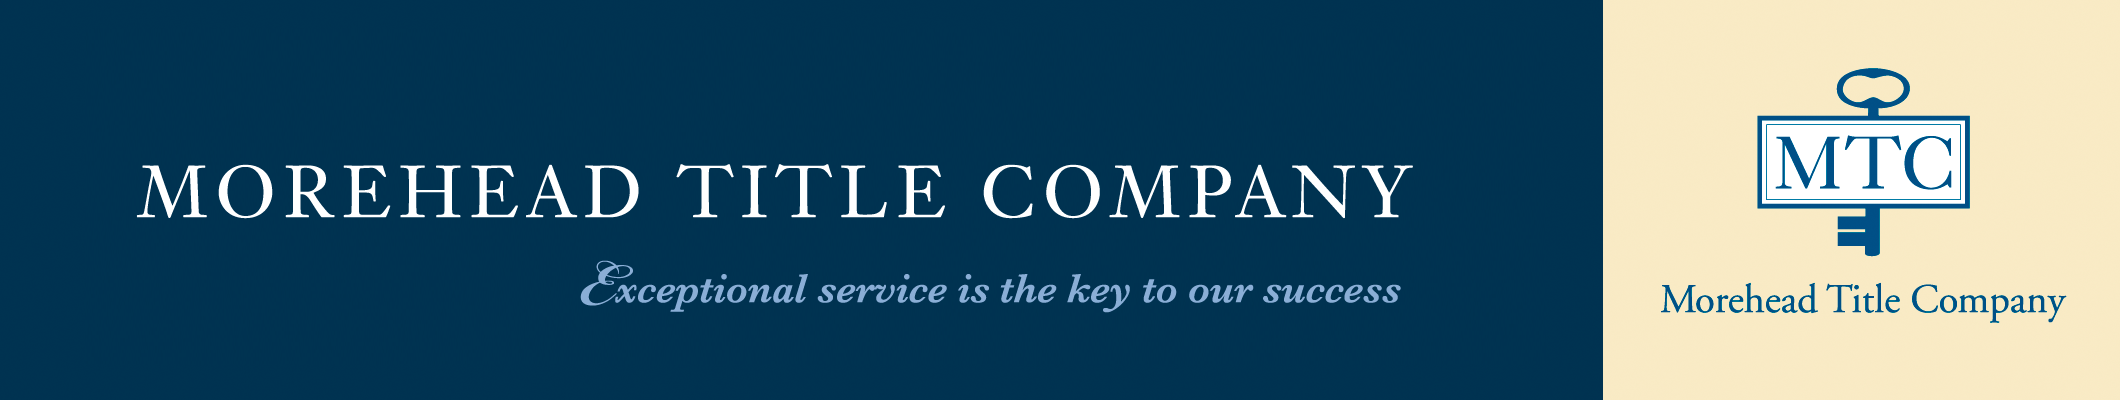 Title Company Logo - Independent Title Company - Commercial Title Company